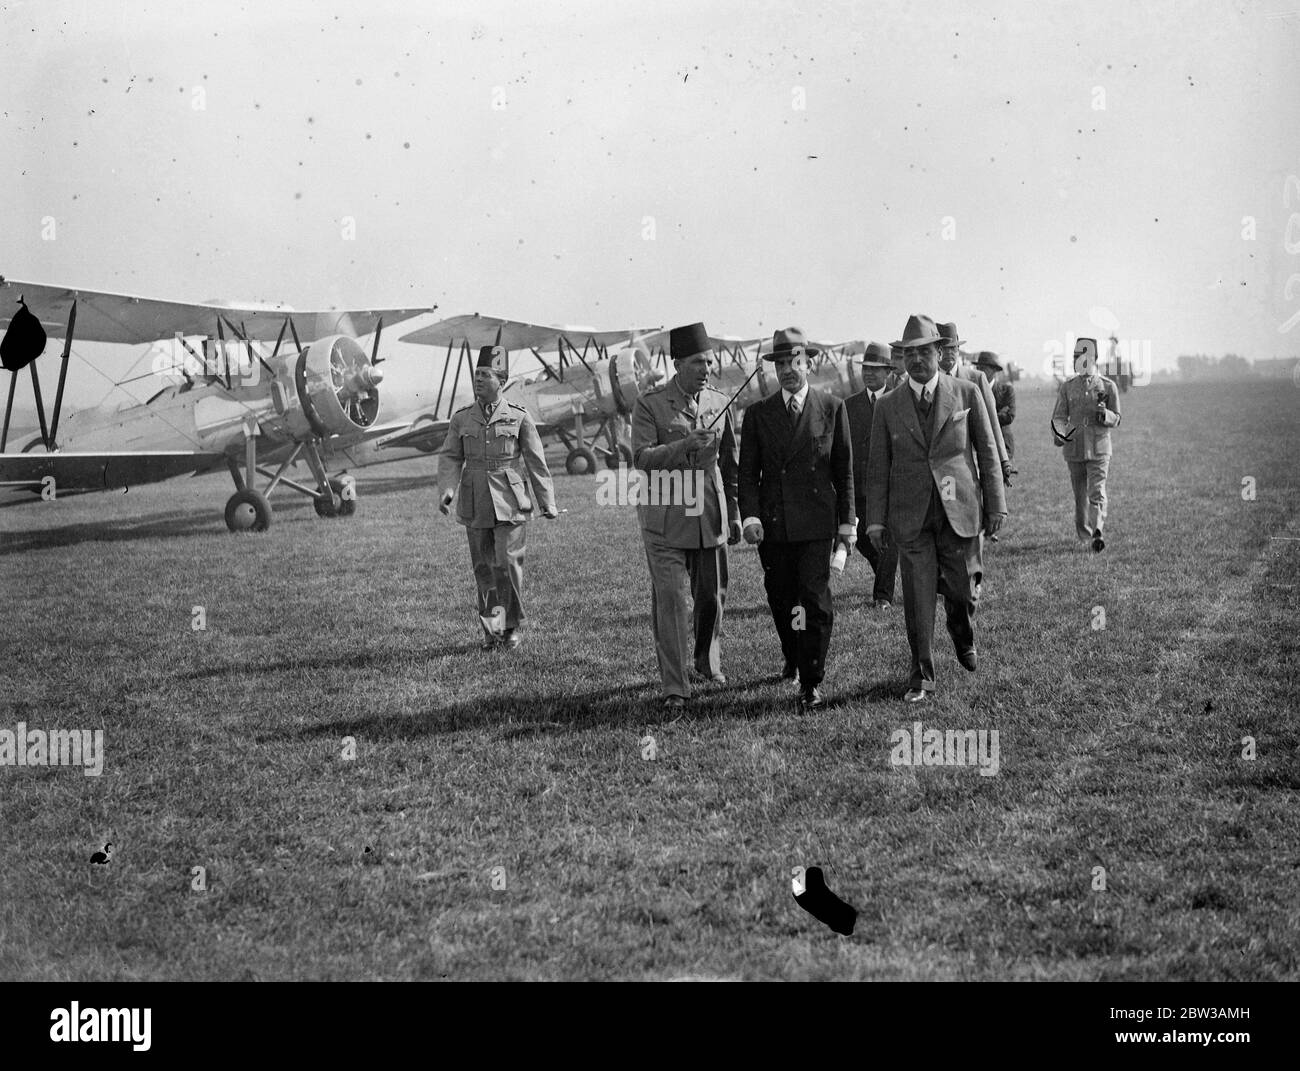 Egyptian air squadron tested at Lympne before formation flight to Egypt . To be used to suppress dope smuggling . A fleet of ten Avro biplanes built in England for the Egyptian Government underwent tests and official inspection at Lympne Aerodrome , Kent , before taking off for a formation flight to Cairo . The planes will be used in Egypt for military purposes and in suppressing the drug traffic . Photo shows the Egyptian Charge d' Affaires in London , H E Hakki Bey , inspecting the squadron and Egyptian officers at Lympne . 14 September 1934 Stock Photo